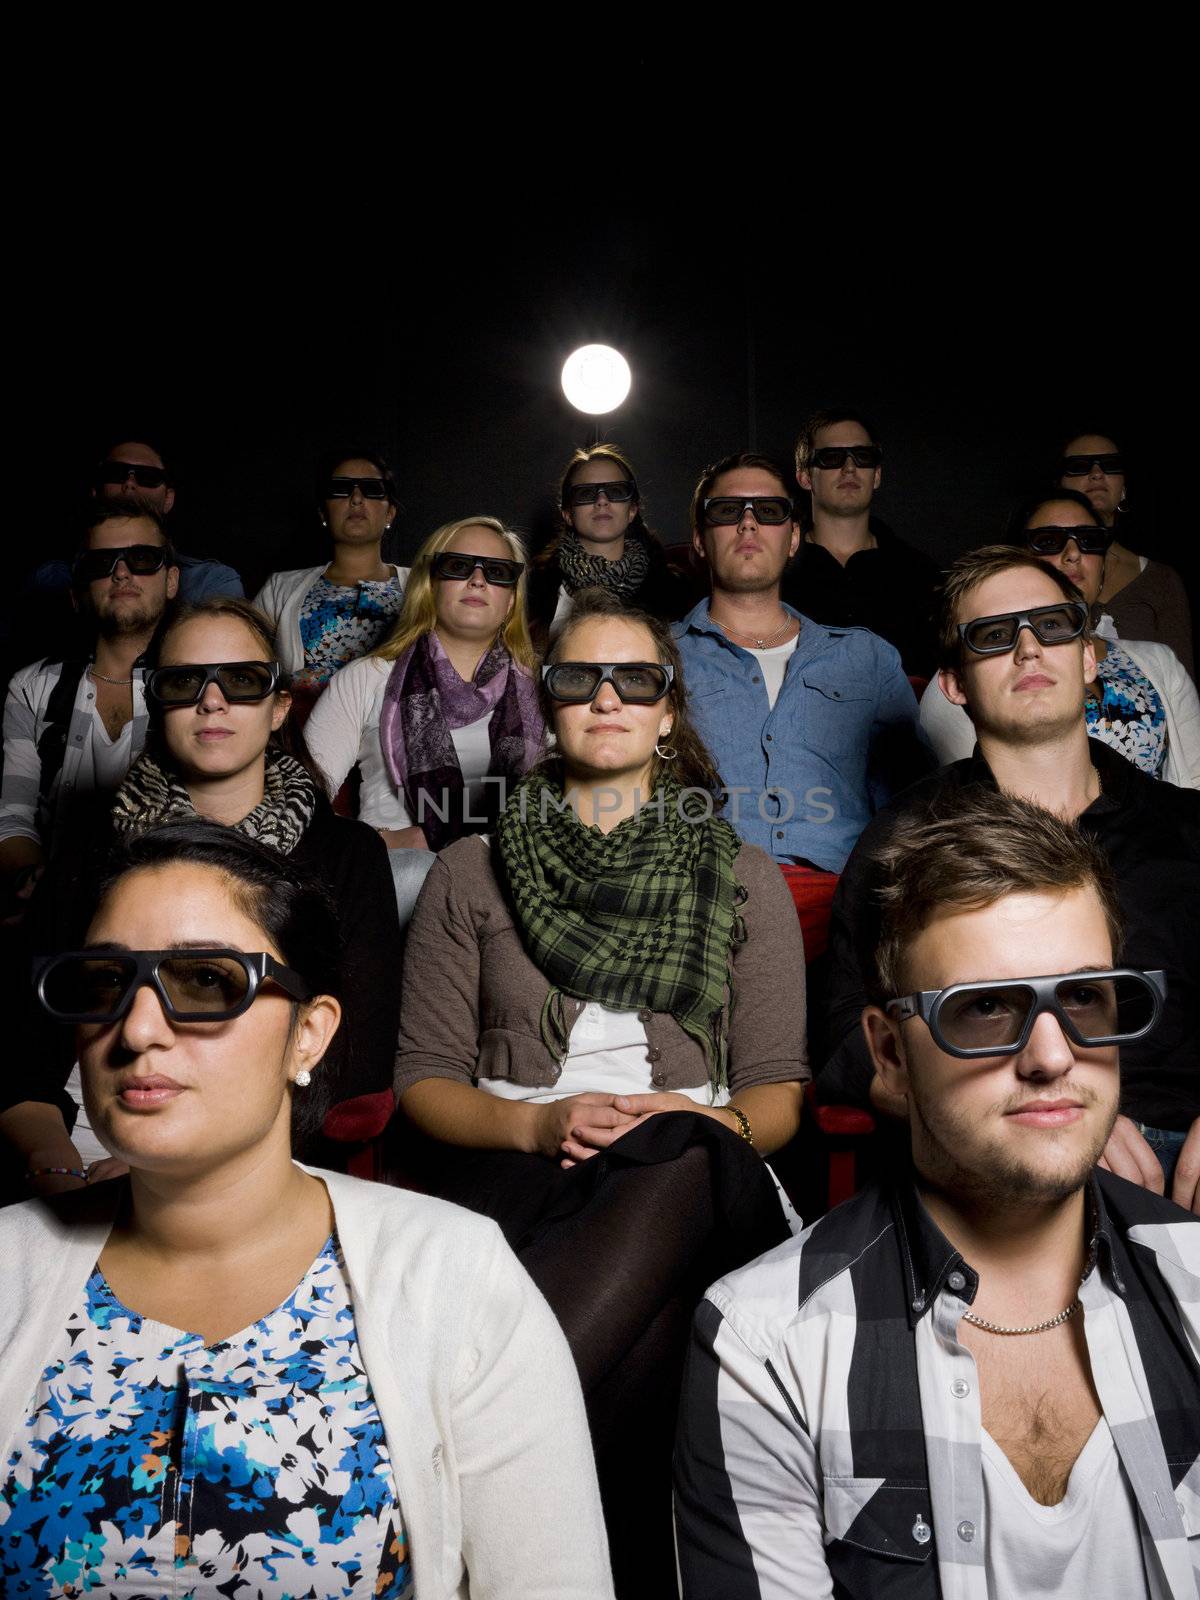 People at the movie Theater wearing 3d glasses